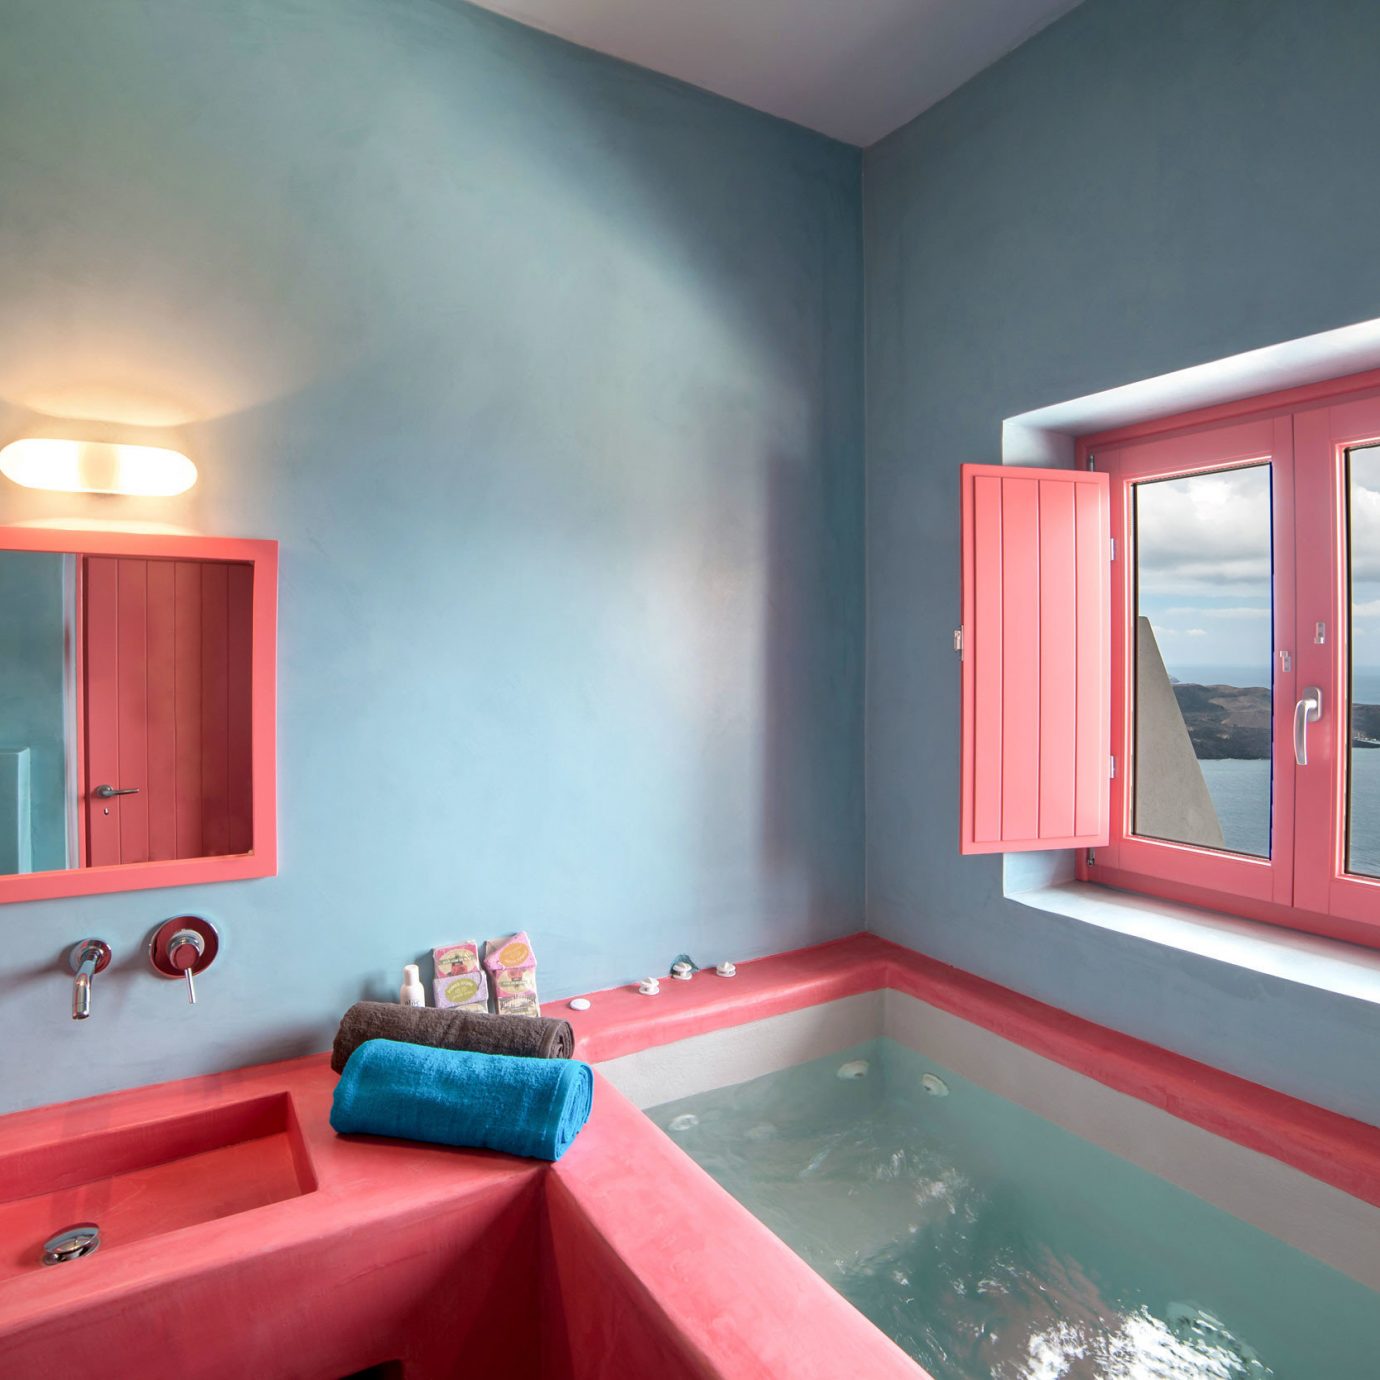 Bath Boutique Suite Waterfront bathroom sink red property pink house painted swimming pool bright home Bedroom living room light cottage colored